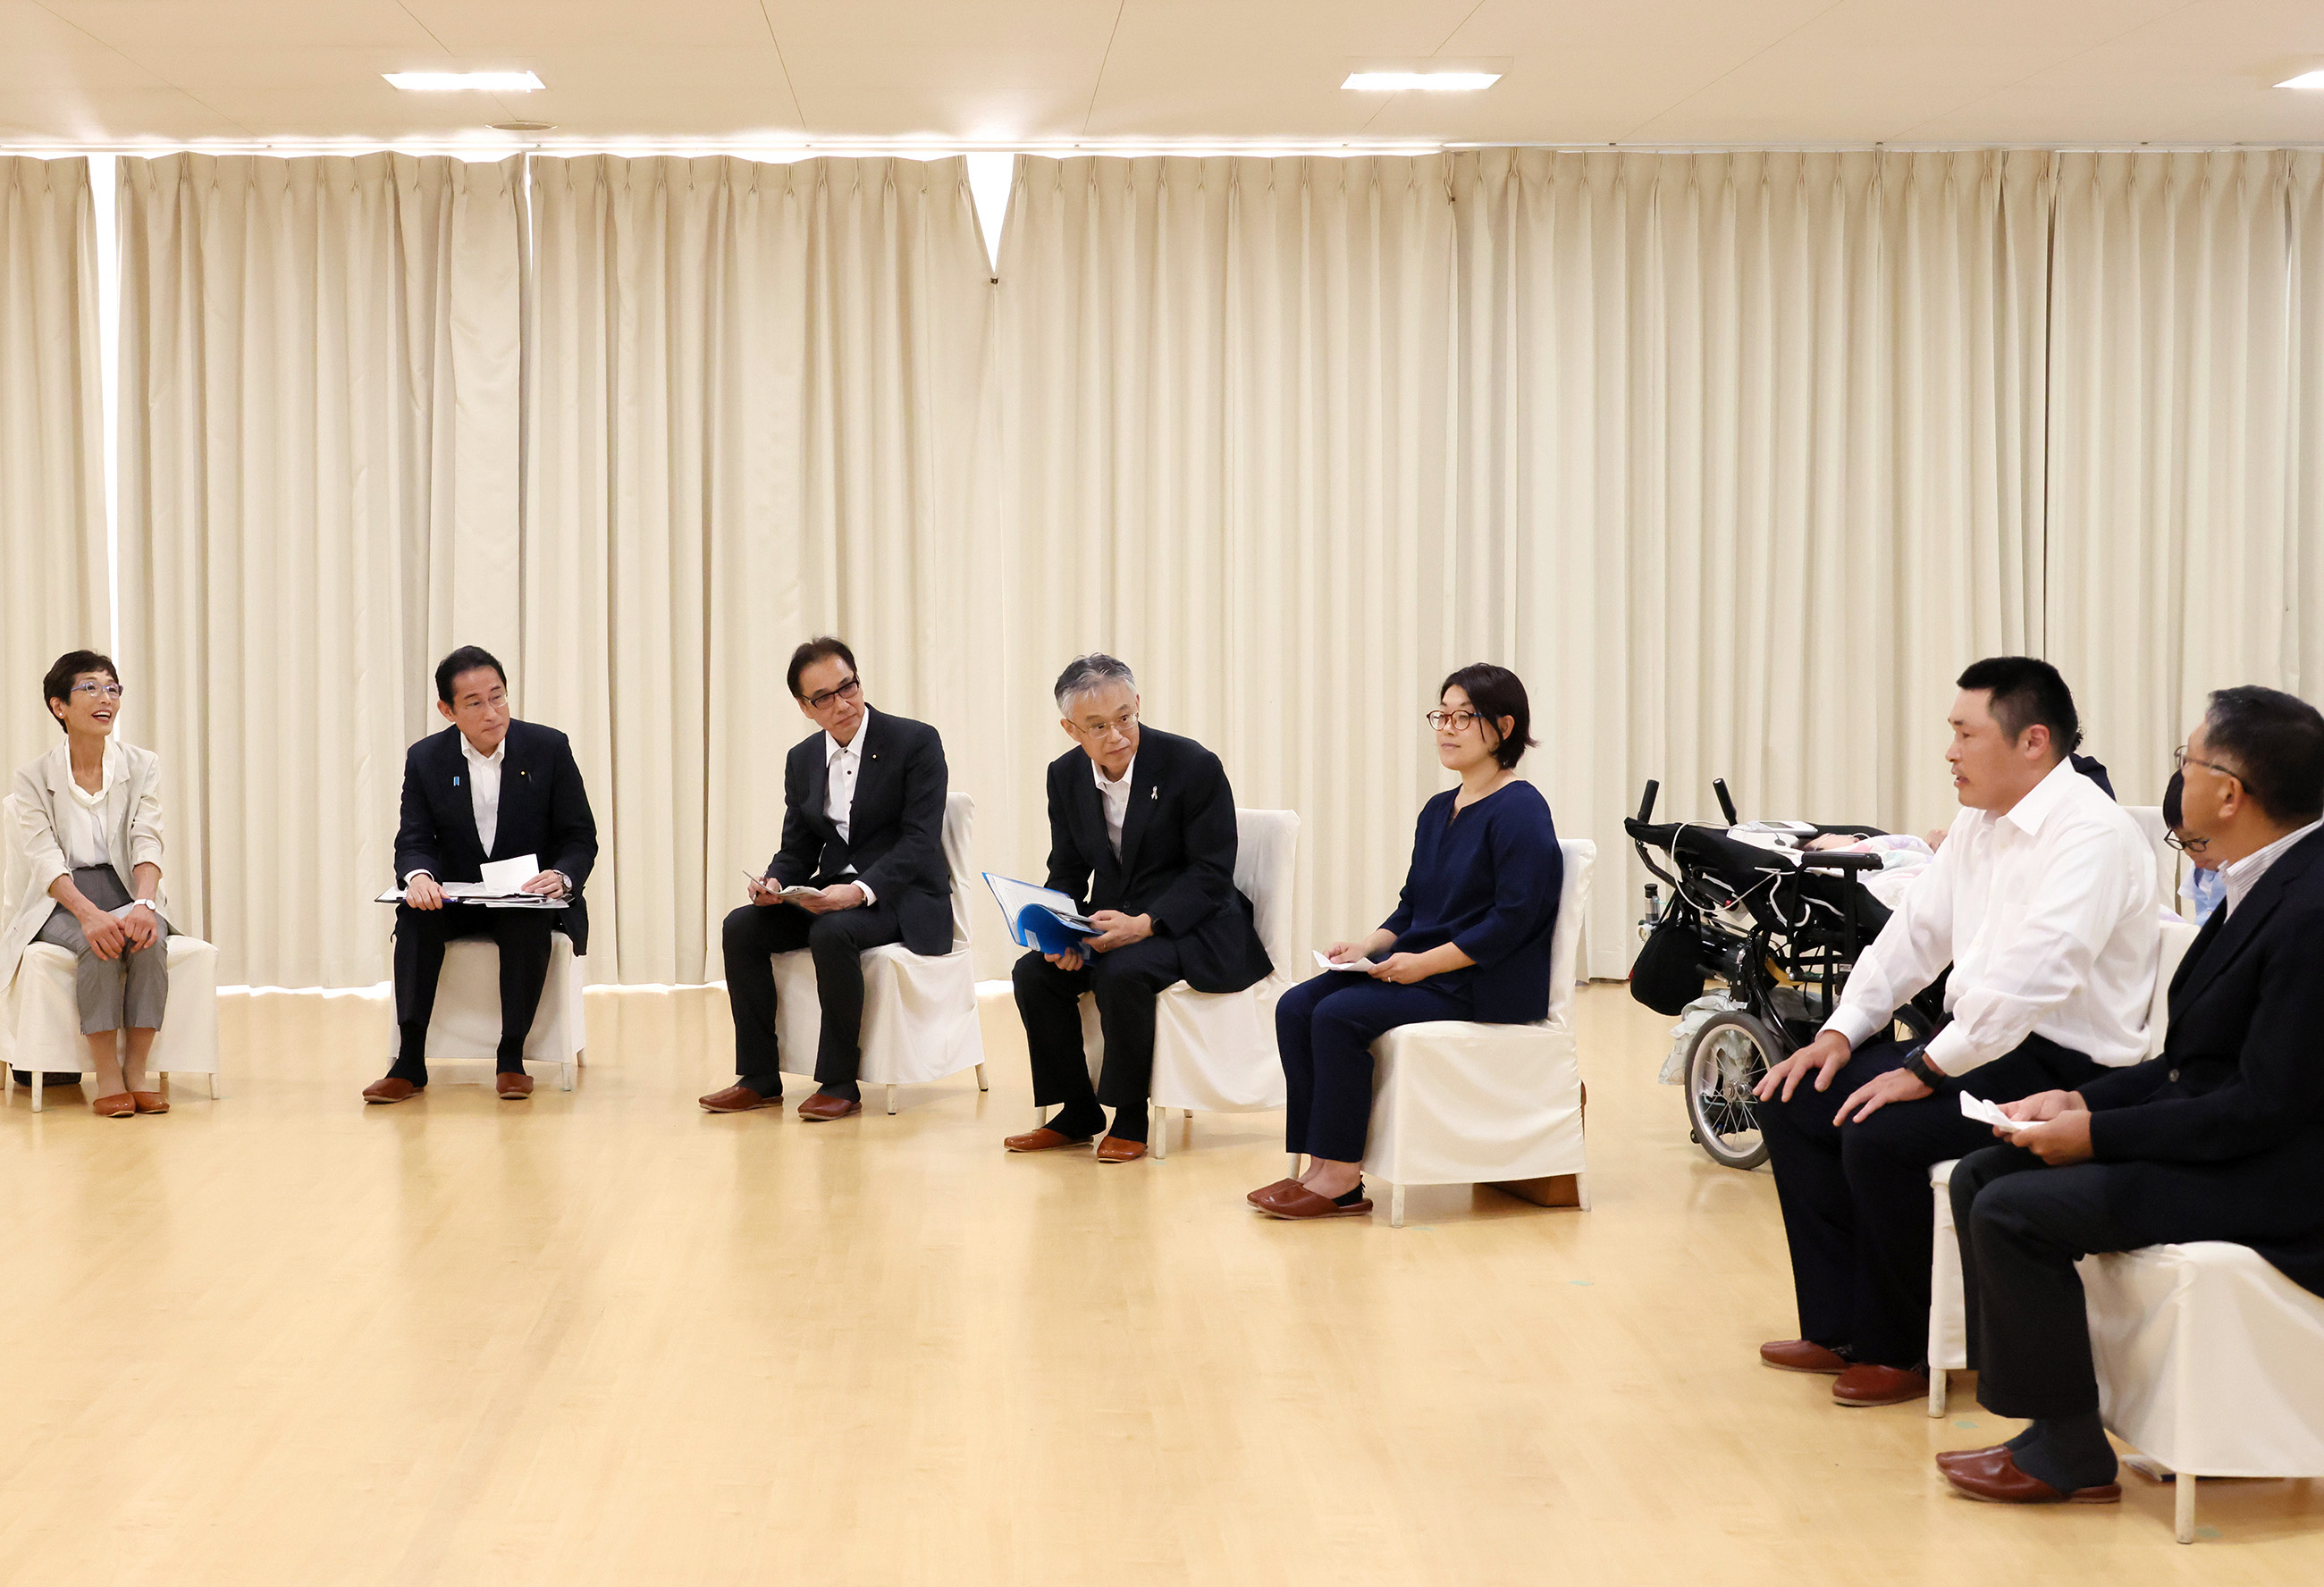 Prime Minister Kishida listening to the participants of the talk with a small group (1)